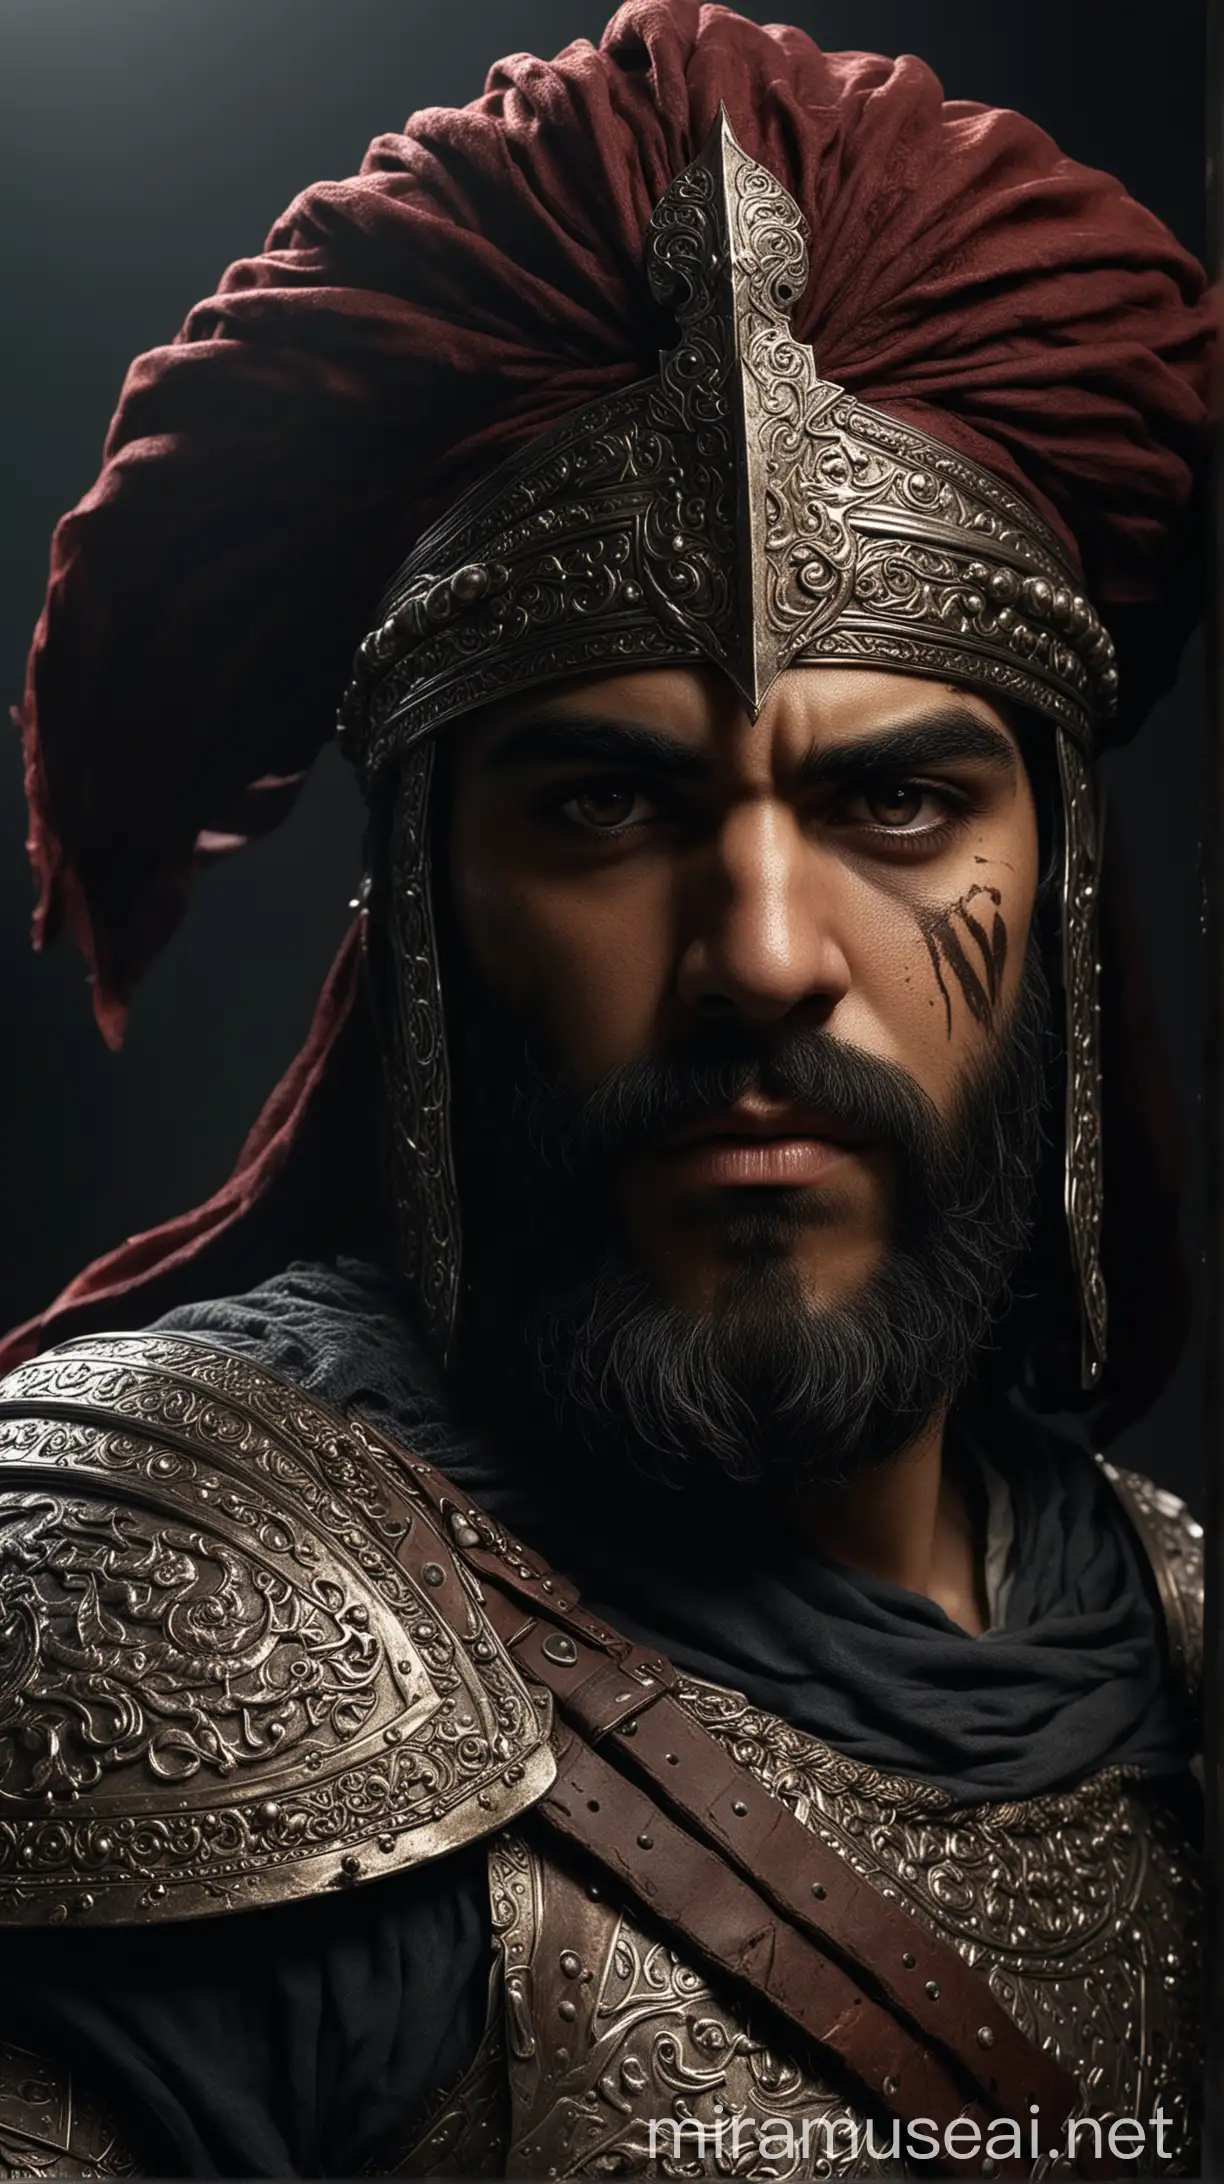 Use an image of an elite Persian warrior in dramatic lighting, emphasizing mystery and strength. hyper realistic